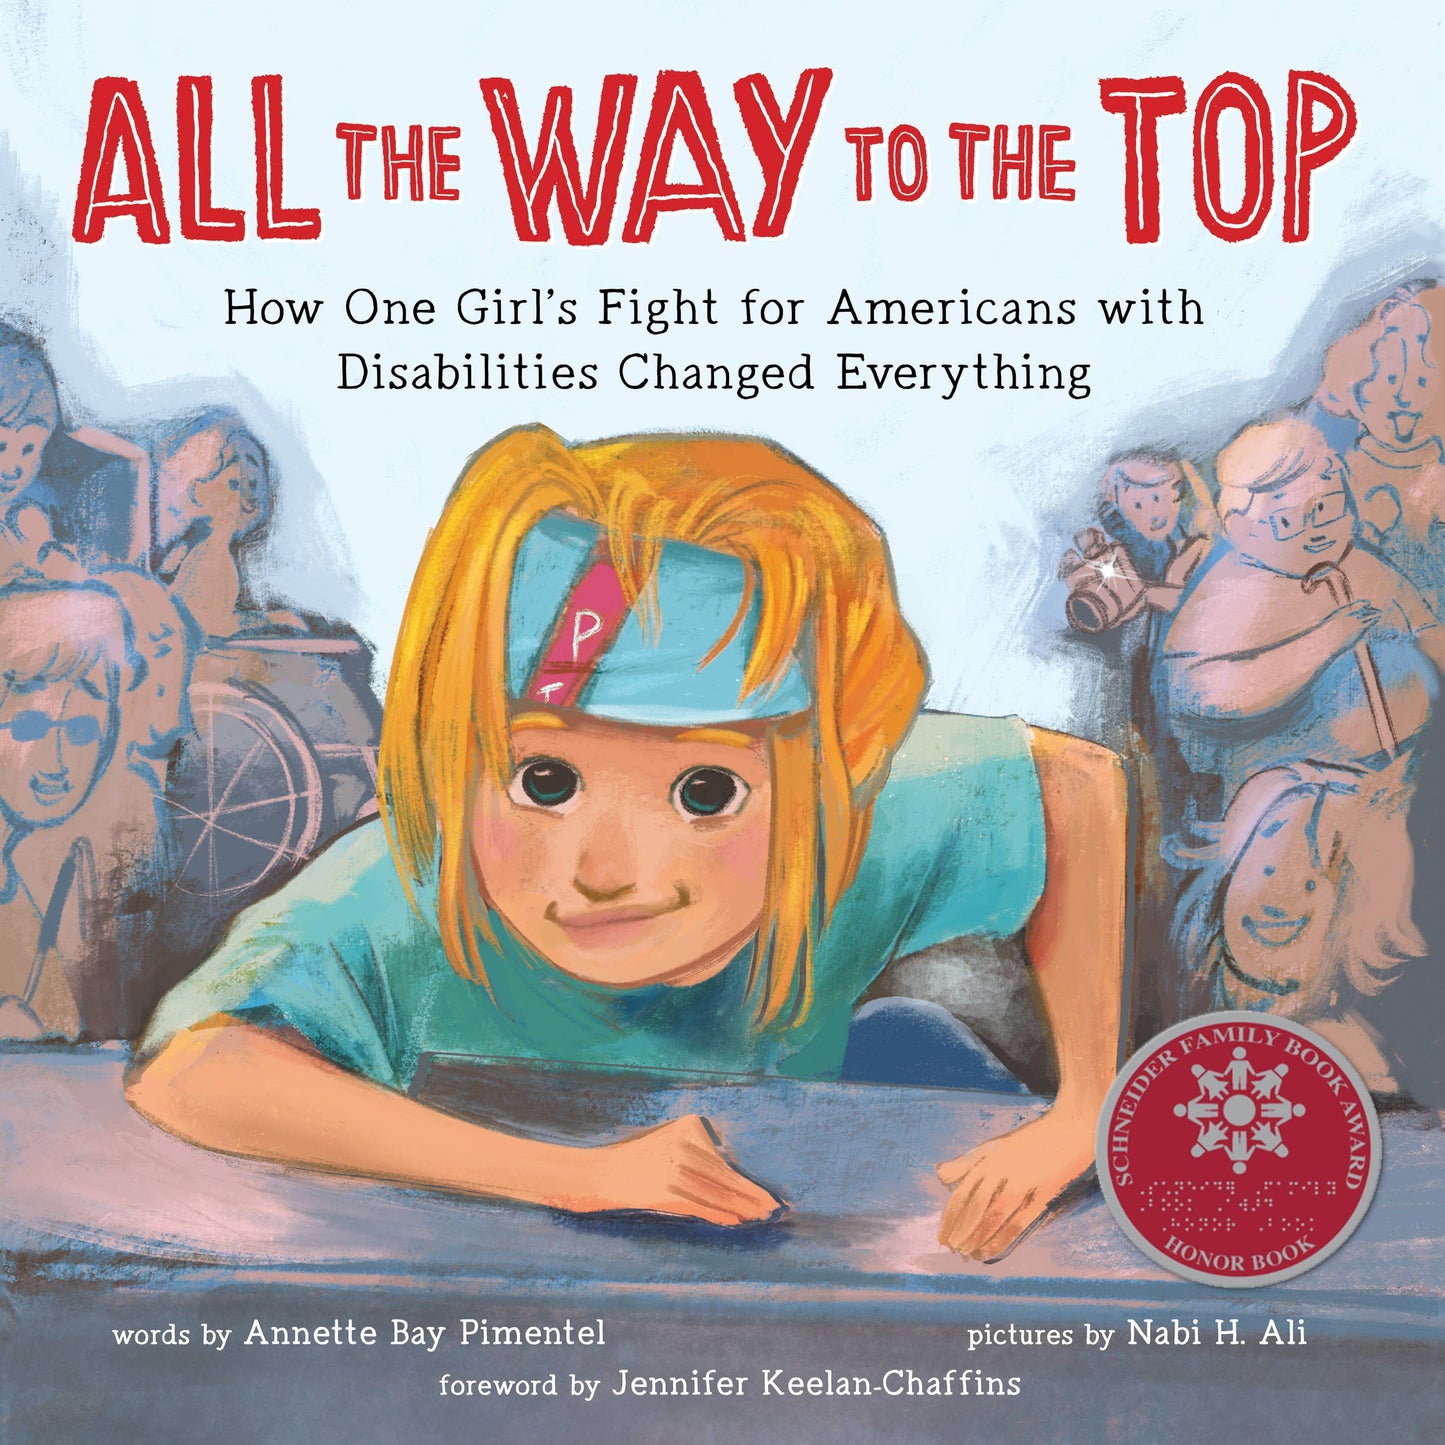 All the Way to the Top: How One Girl's Fight for Americans with Disabilities Changed Everything by Annette Bay Pimentel (Hardcover)